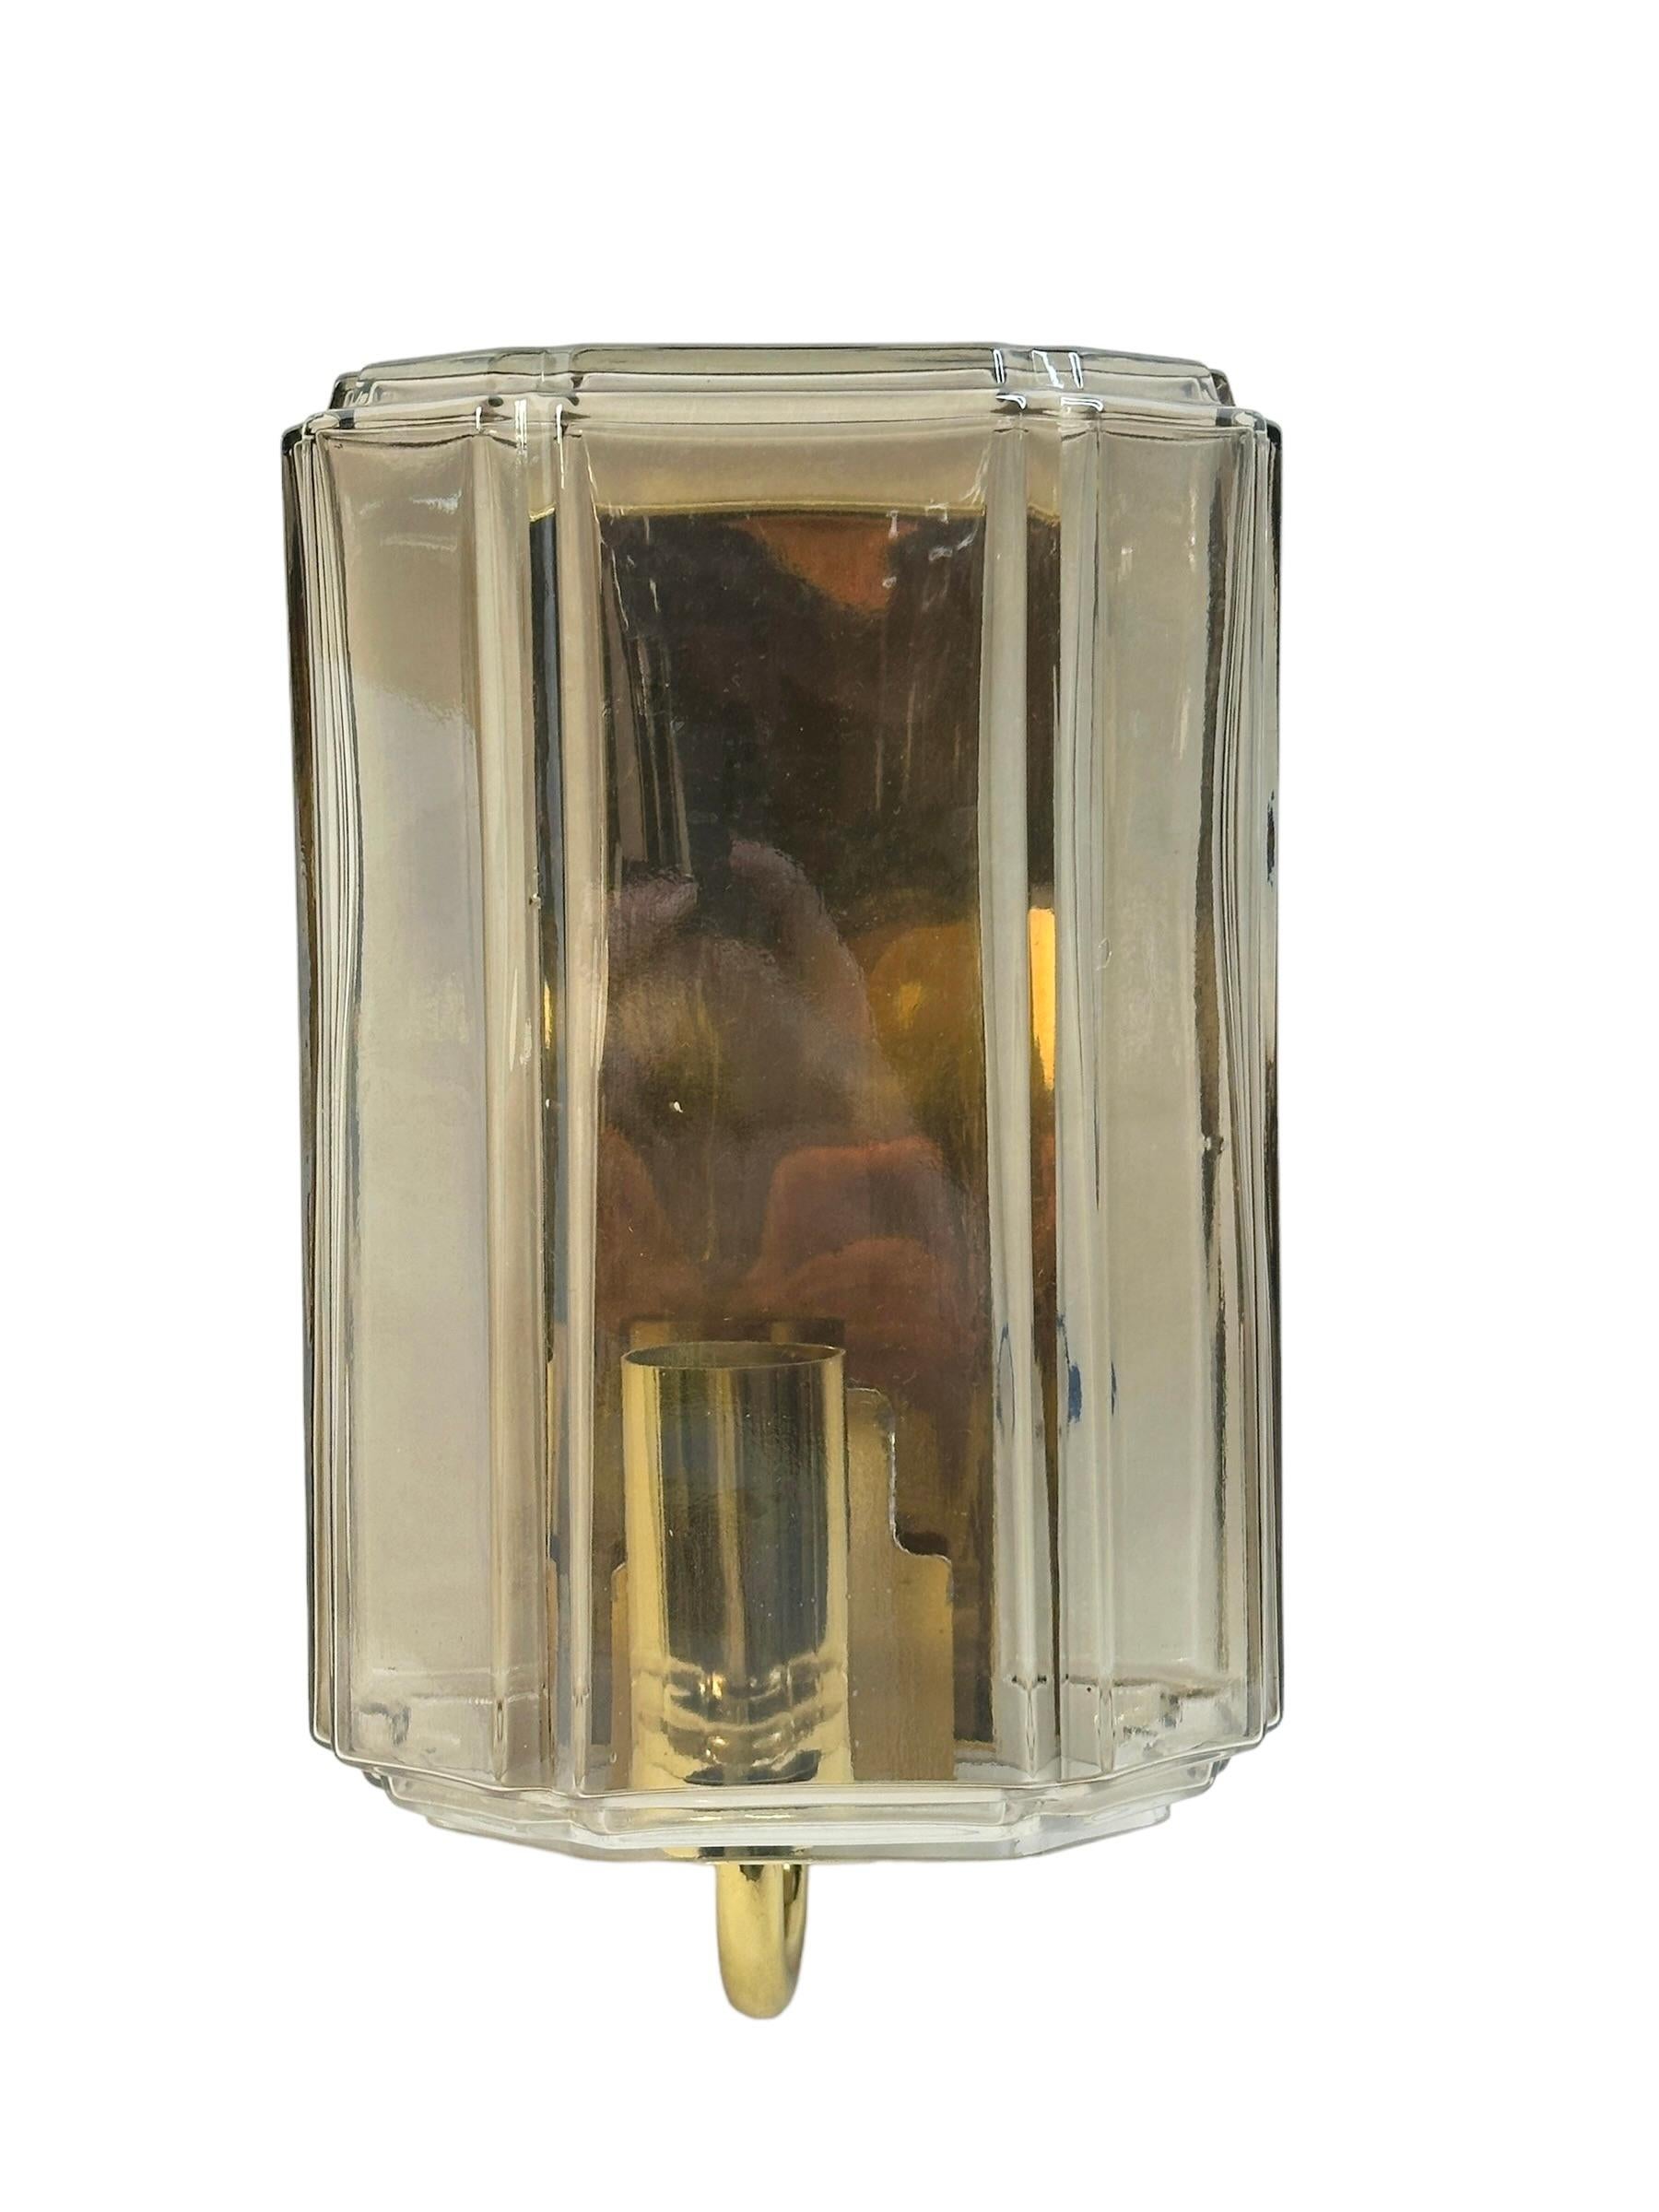 A beautiful and rare midcentury light clear smoked glass sconce designed for Glashuette Limburg (Germany, 1960s). The amber or champagne colored hand blown glass shade casts a wonderful light (see image). A Mid-Century Modern design Classic. Cleaned